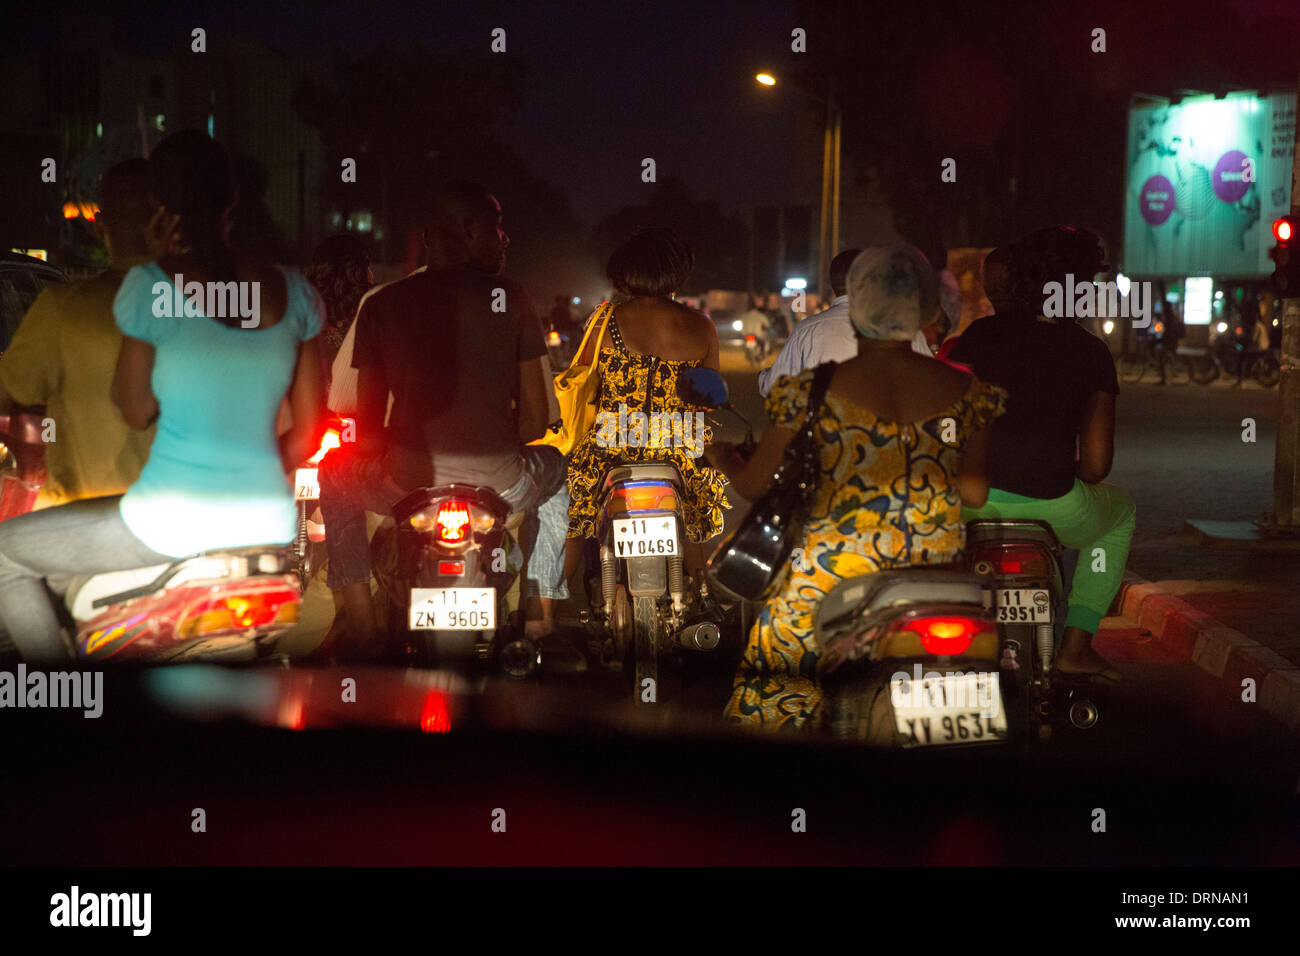 people riding scooters and mopeds at night in Bobo Dioulasso, Burkina Faso Stock Photo